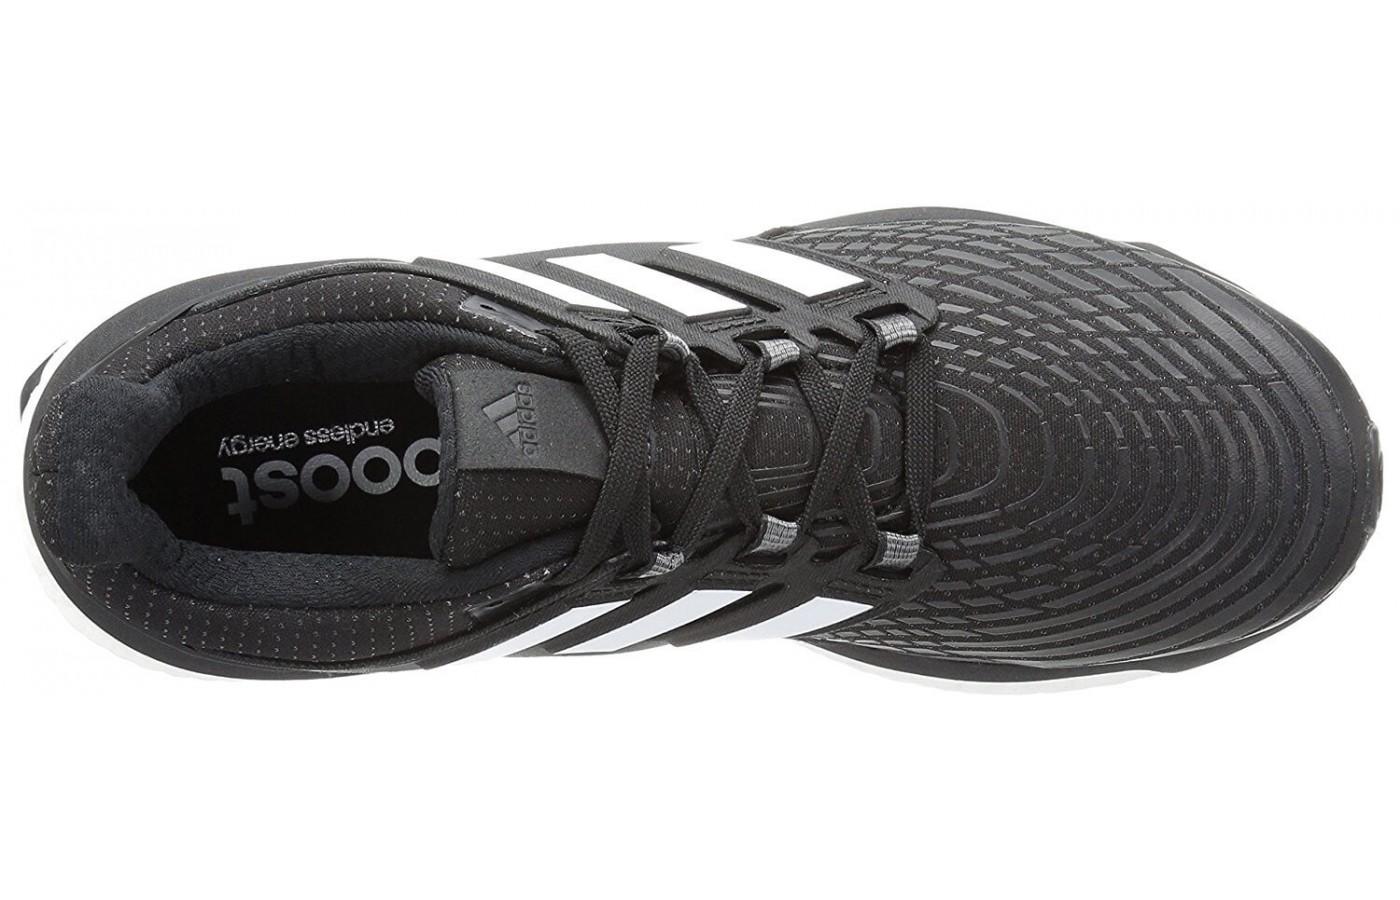 the Adidas Energy Boost has a stretchy, sock like upper